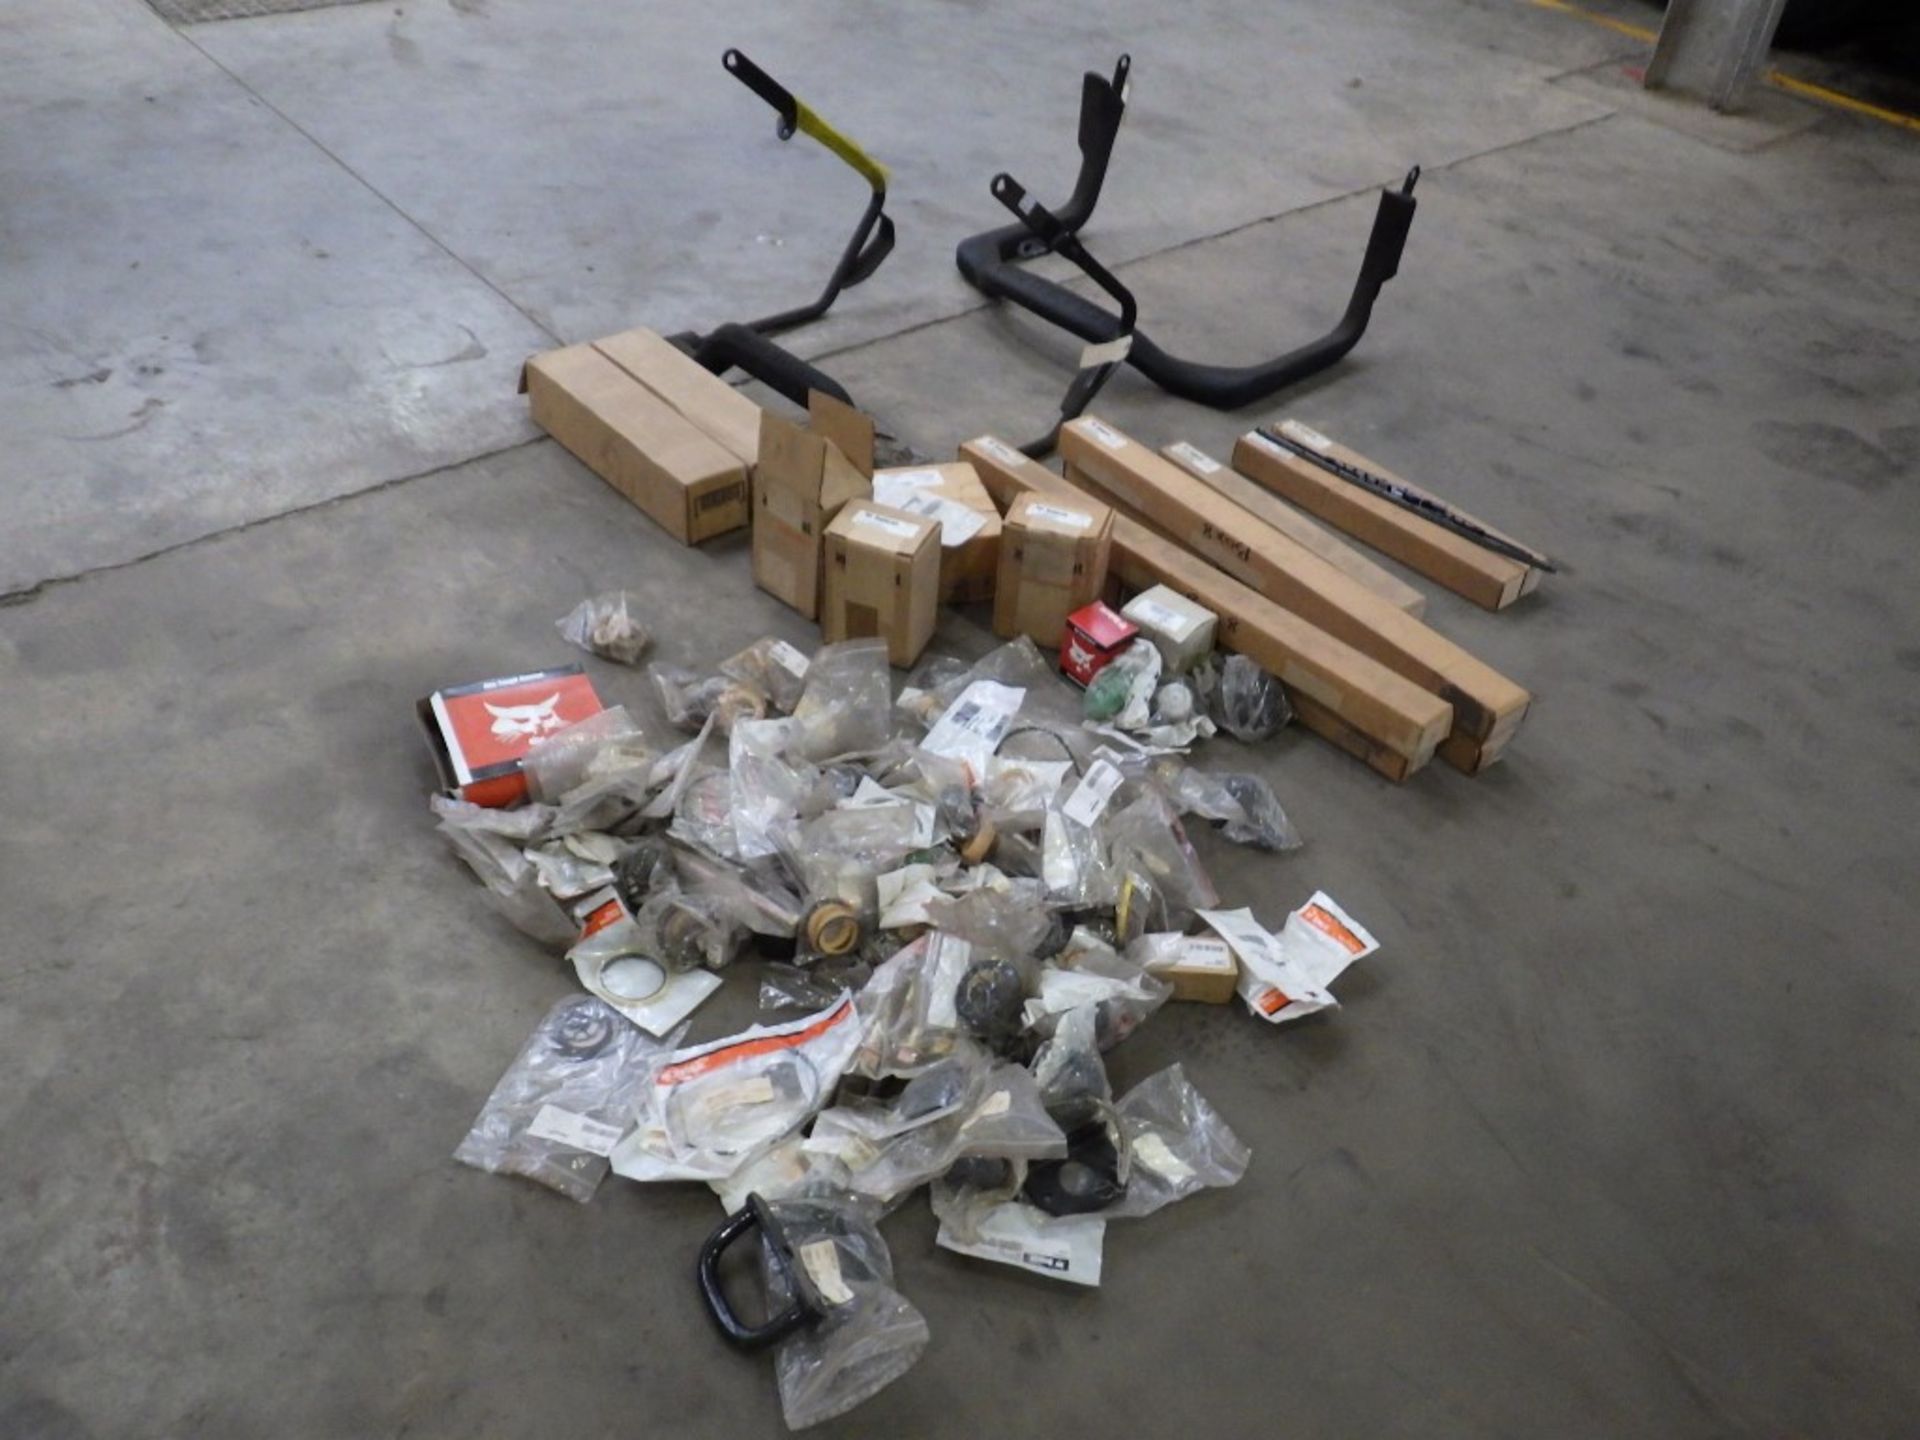 ASSORTED BOBCAT PARTS INCL. SAFETY FRAME / BARS, SEAT BELT, GAS STRUTS, HANDLES, LATCHES, NUTS,